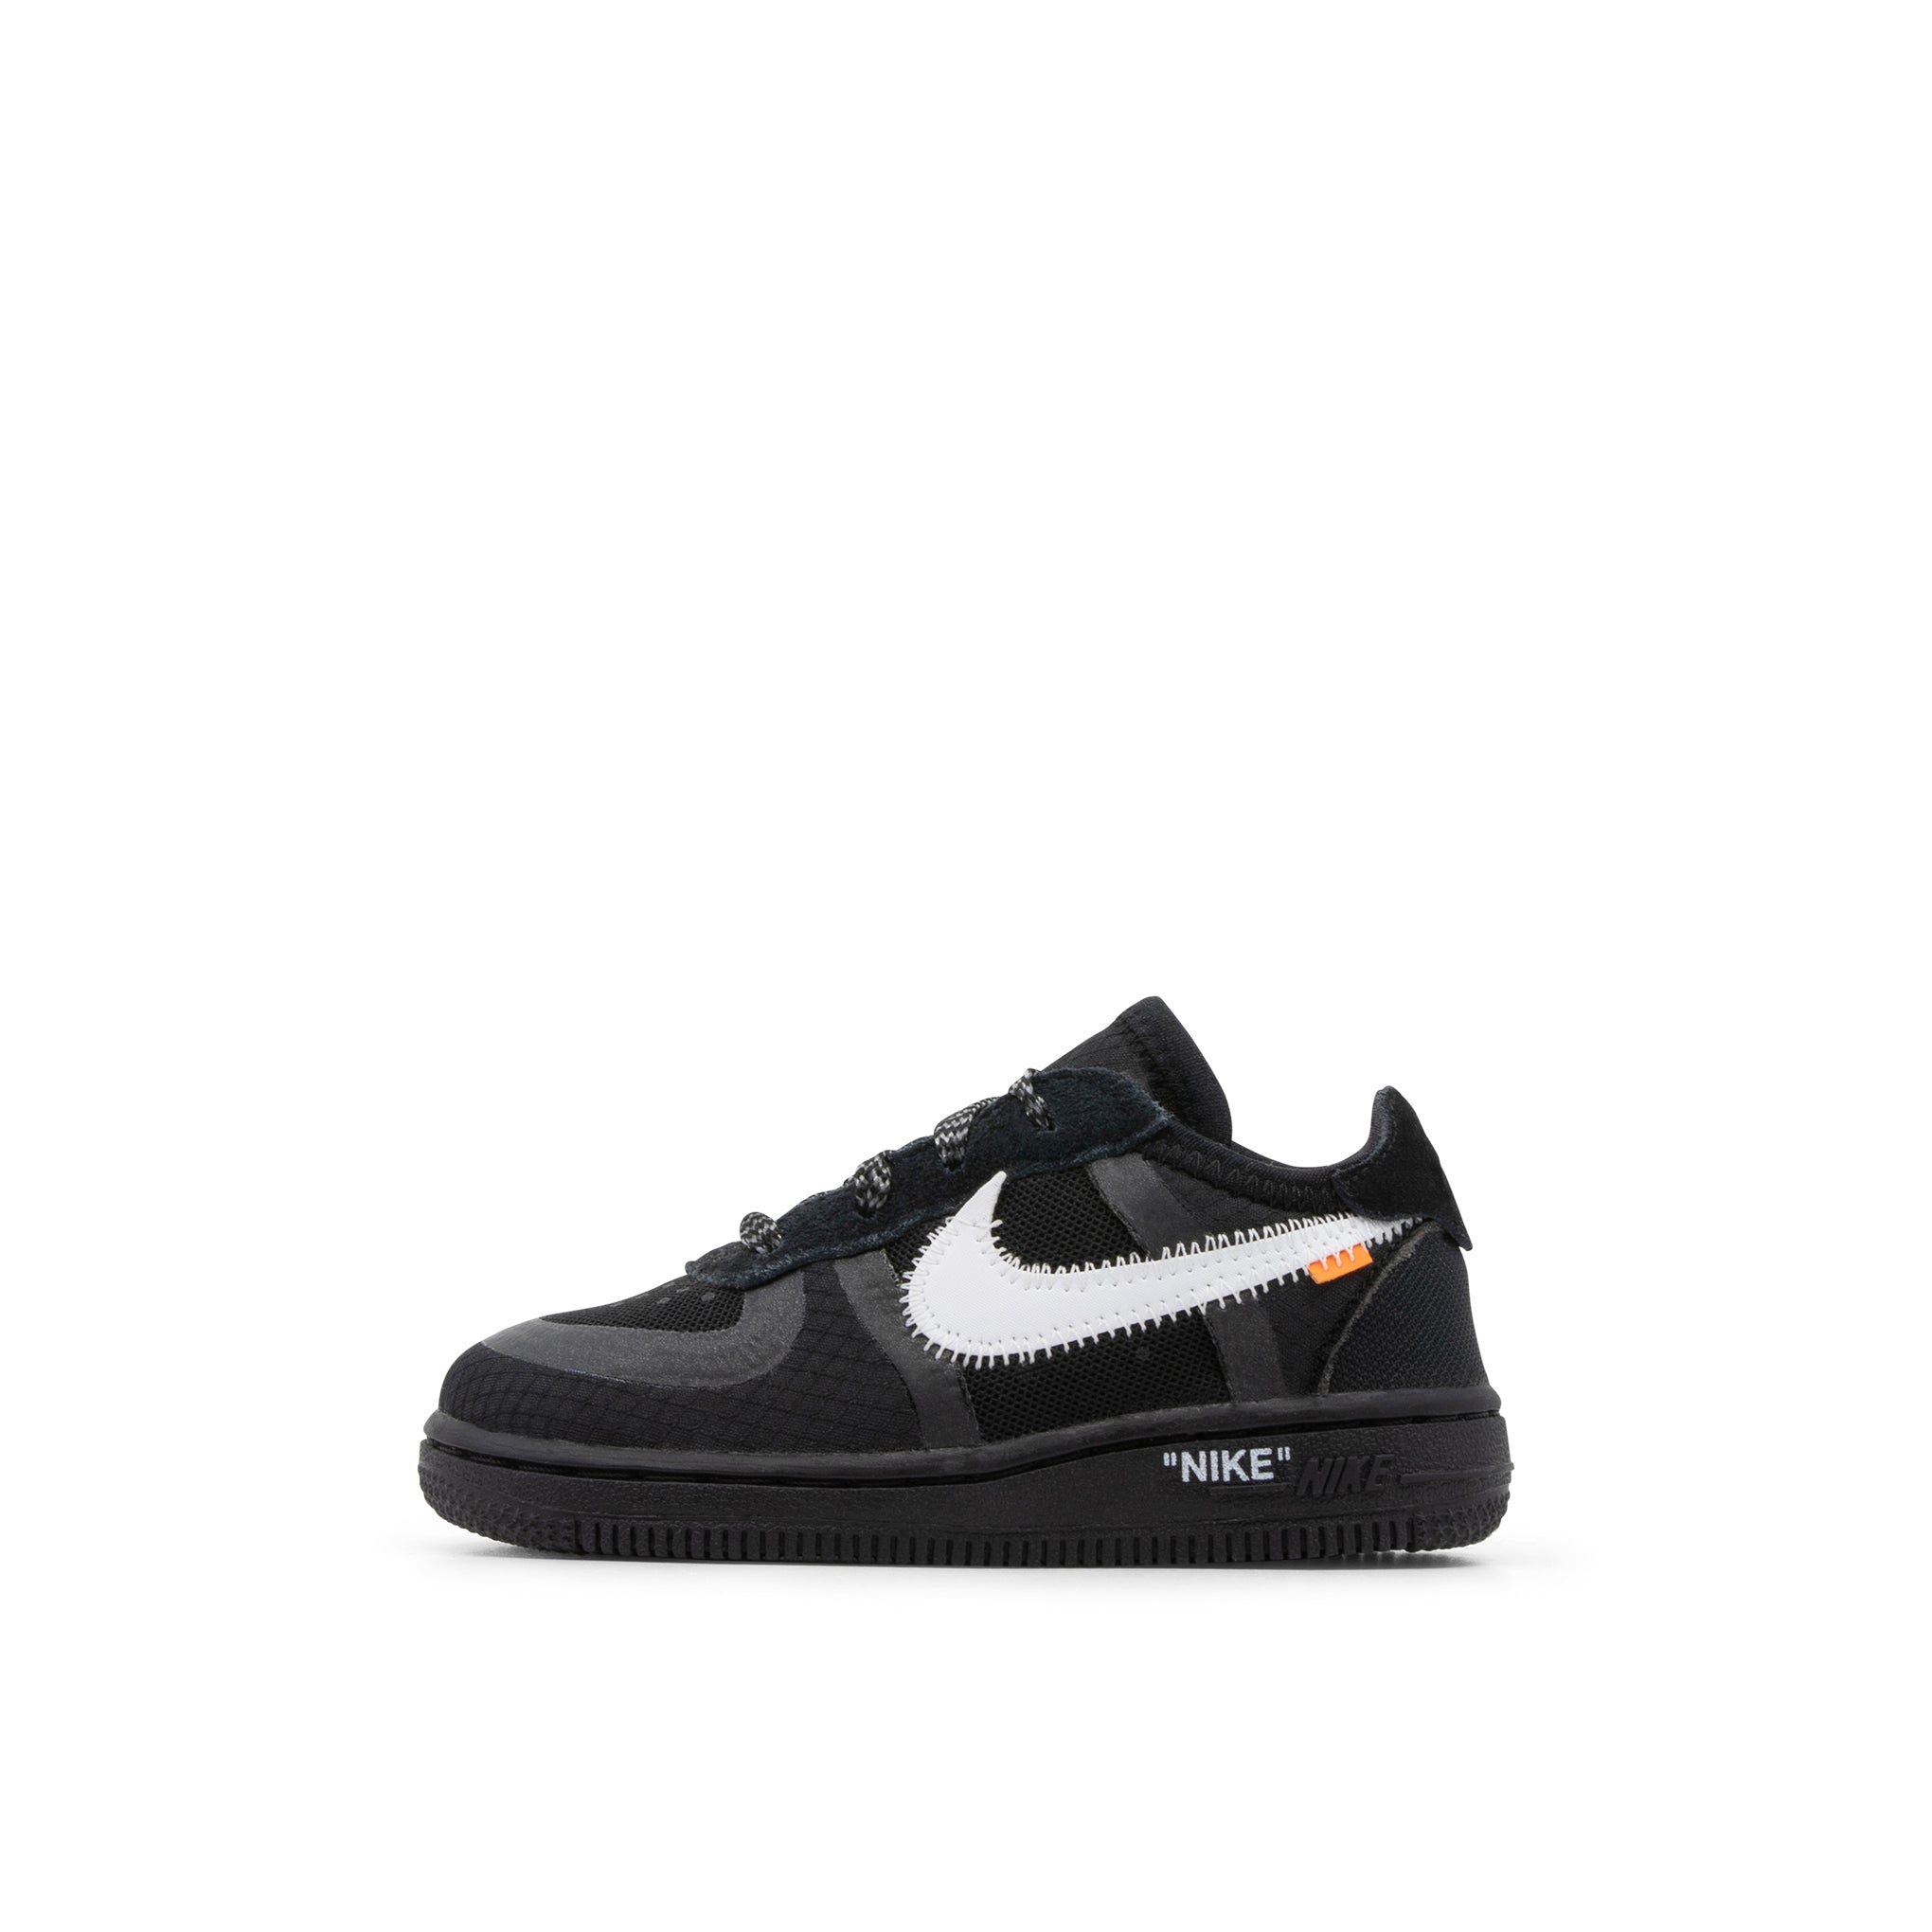 NIKE AIR FORCE 1 LOW TD OFF-WHITE BLACK